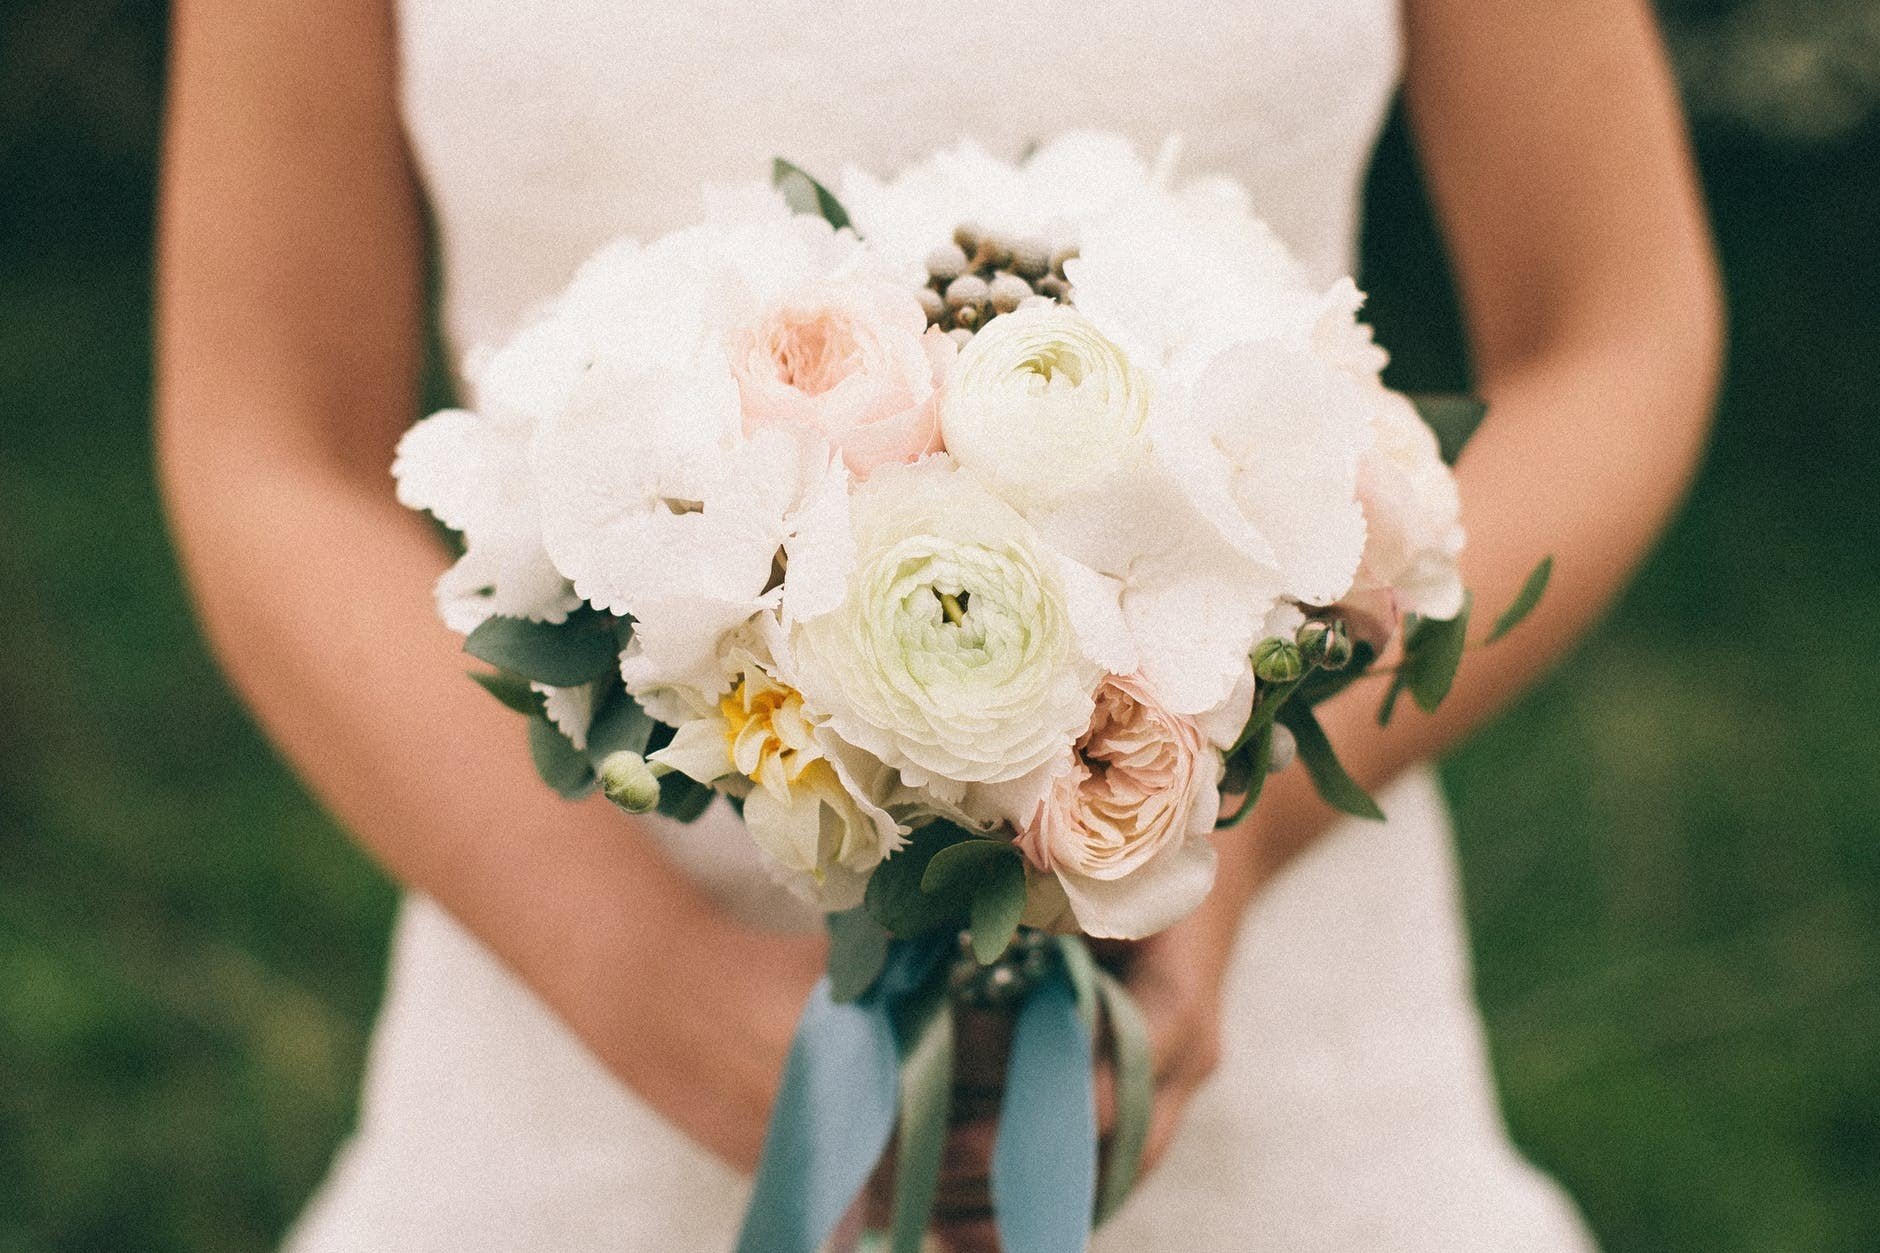 How to Choose Seasonal Blooms for Your Wedding Flowers